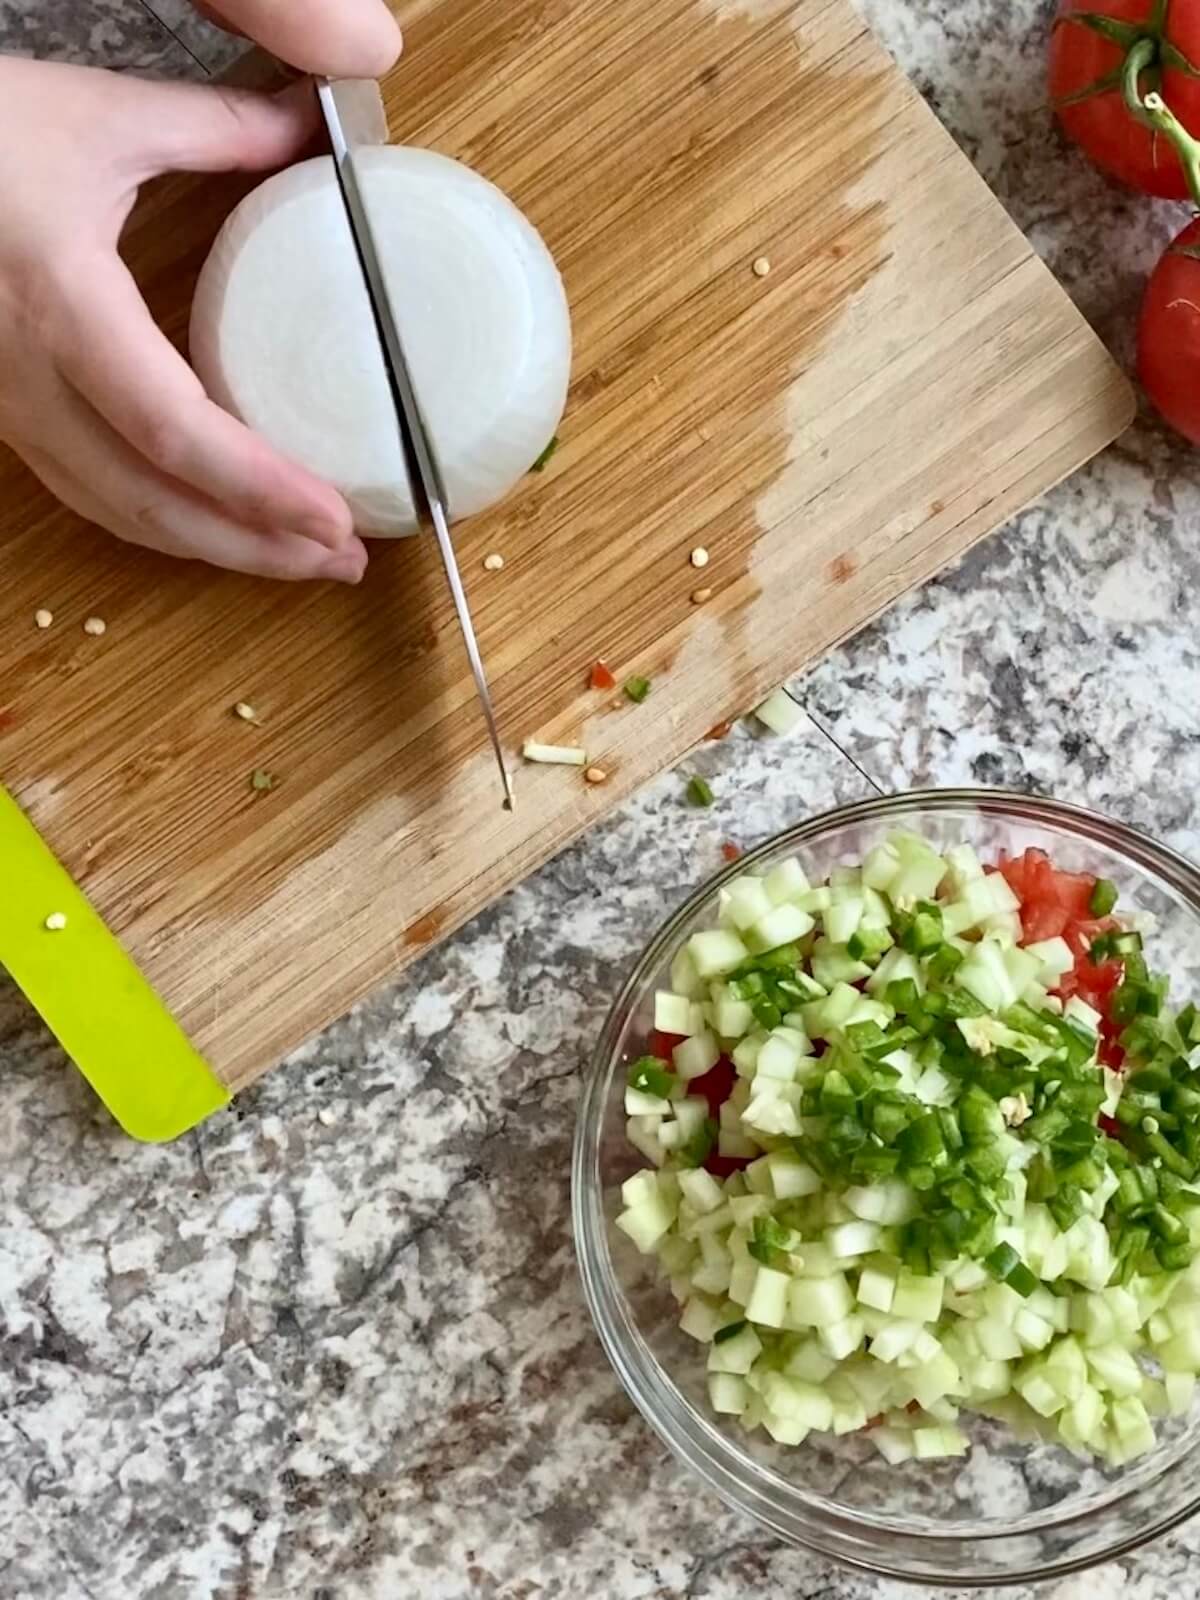 A knife slicing through a white onion on a bamboo cutting board. In front of the cutting board is a glass bowl filled with already chopped vegetables.